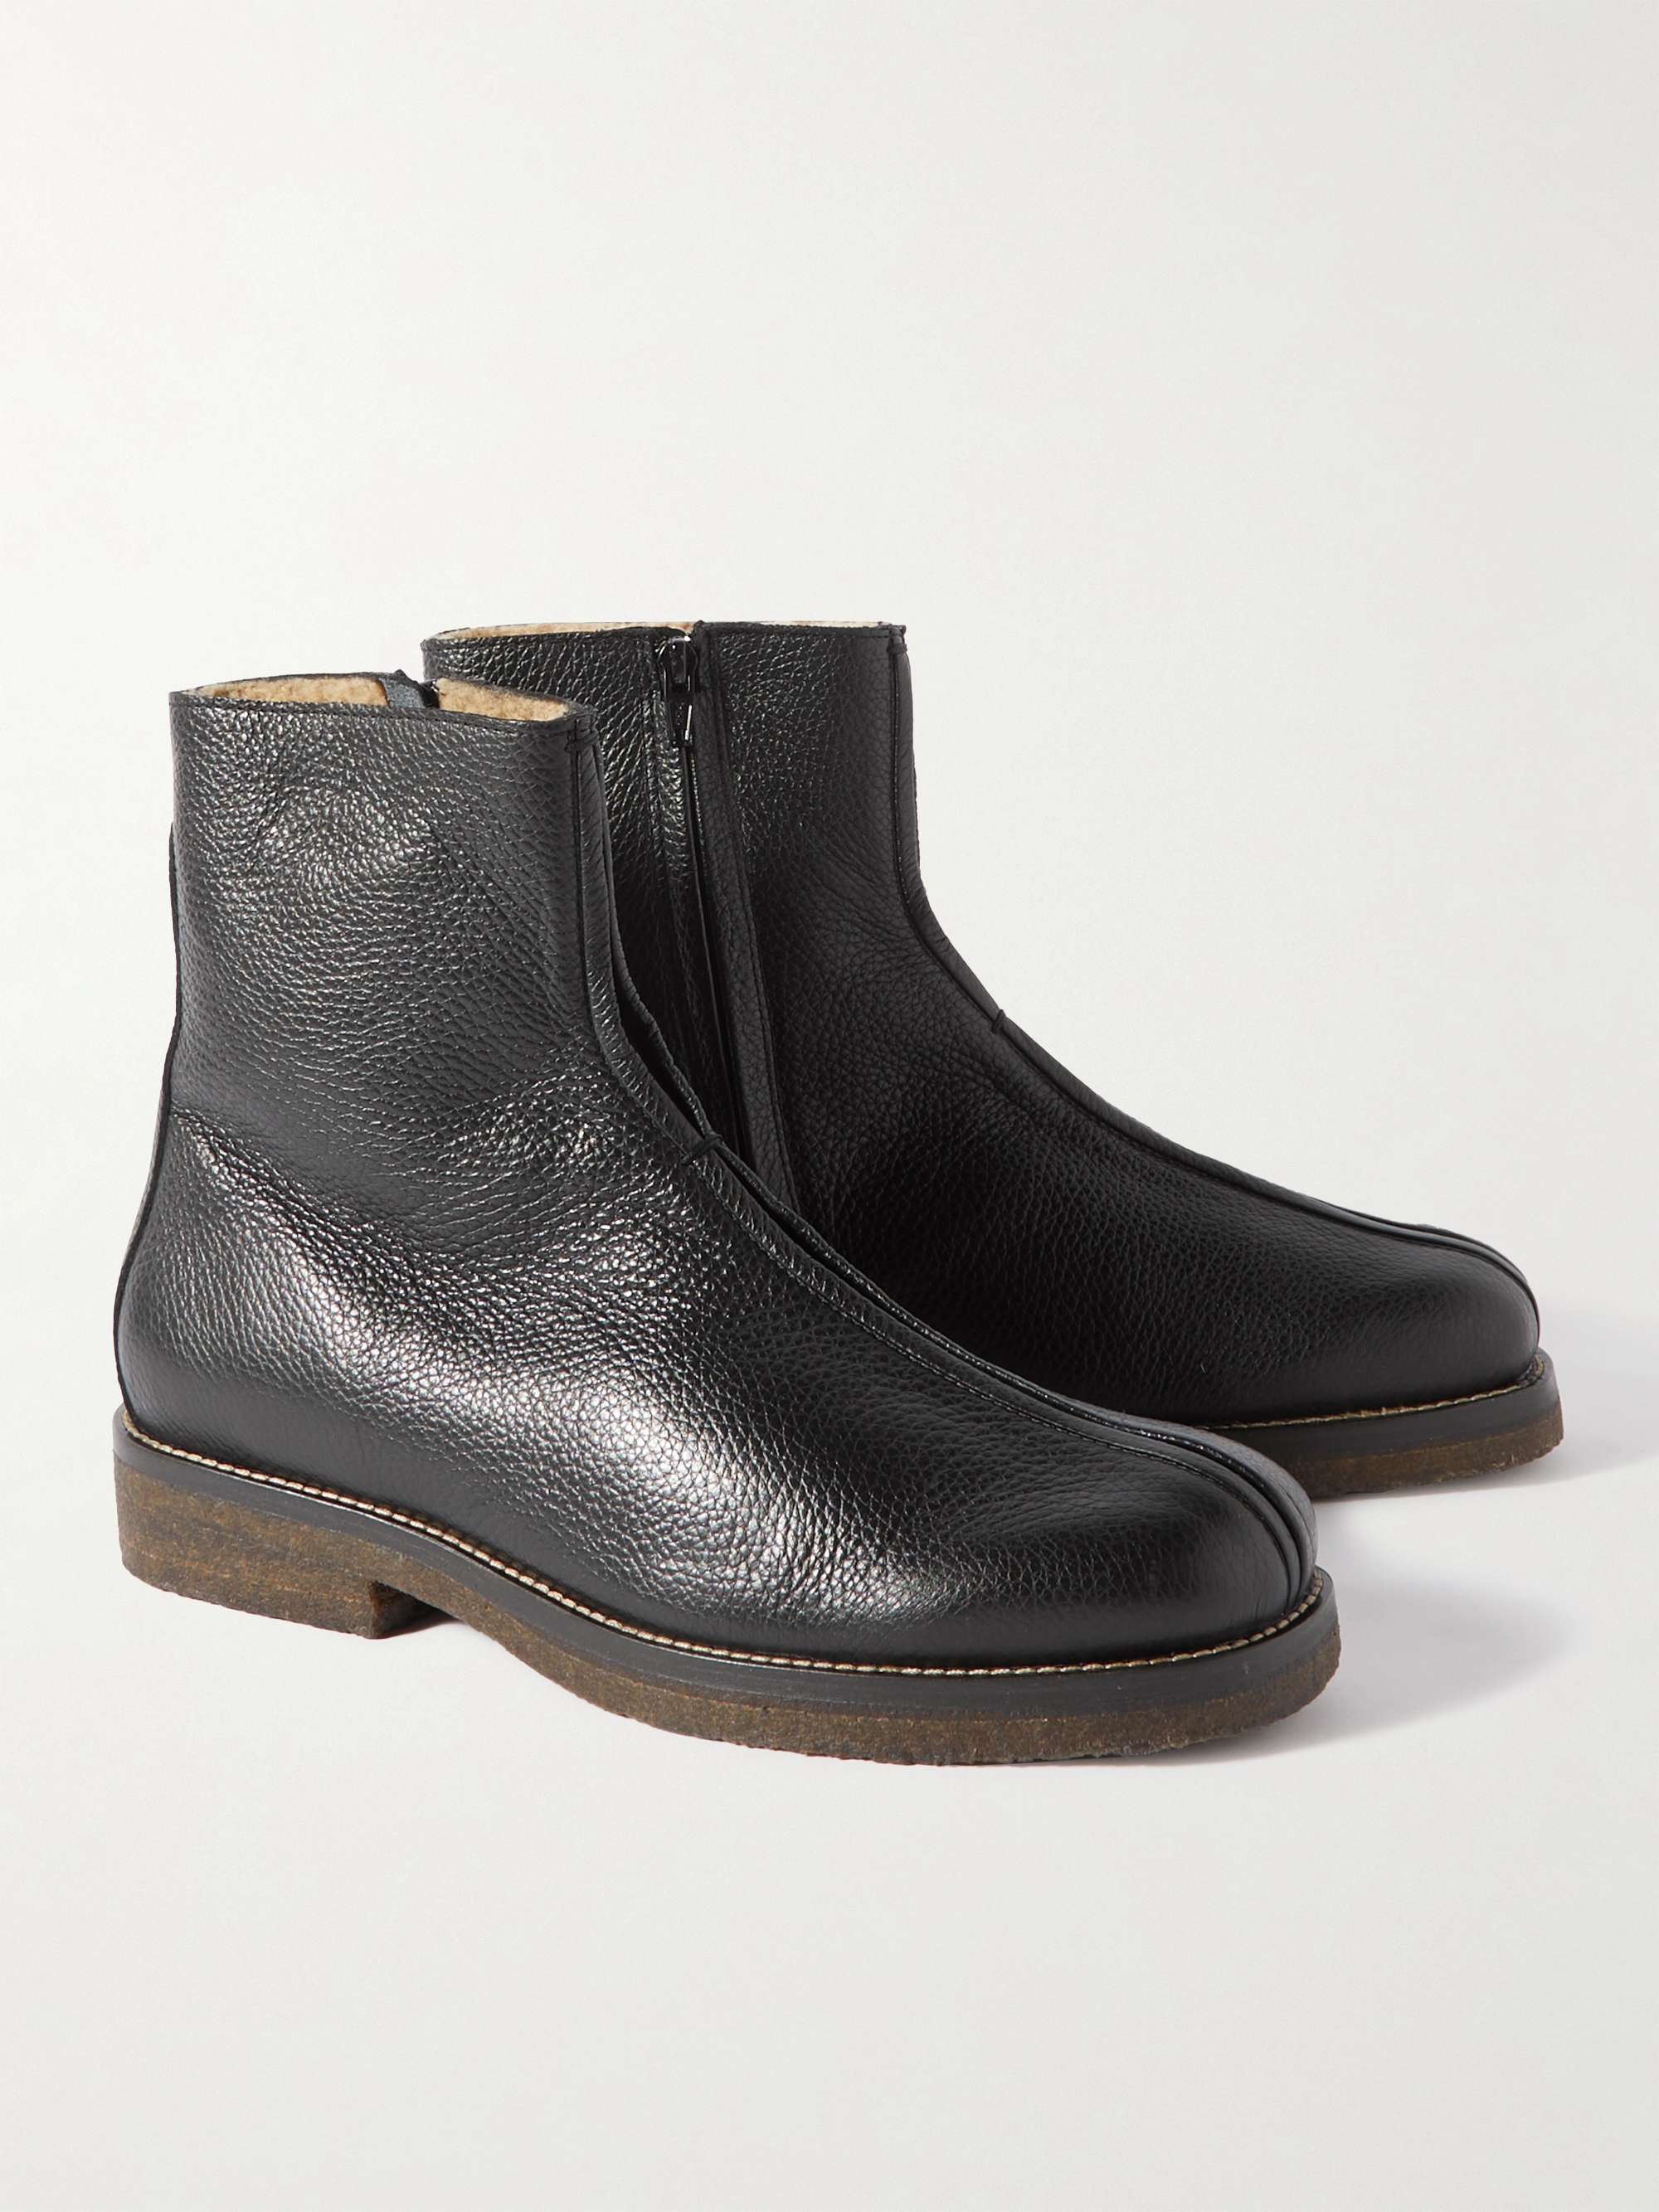 LEMAIRE Shearling-Lined Full-Grain Leather Boots for Men | MR PORTER